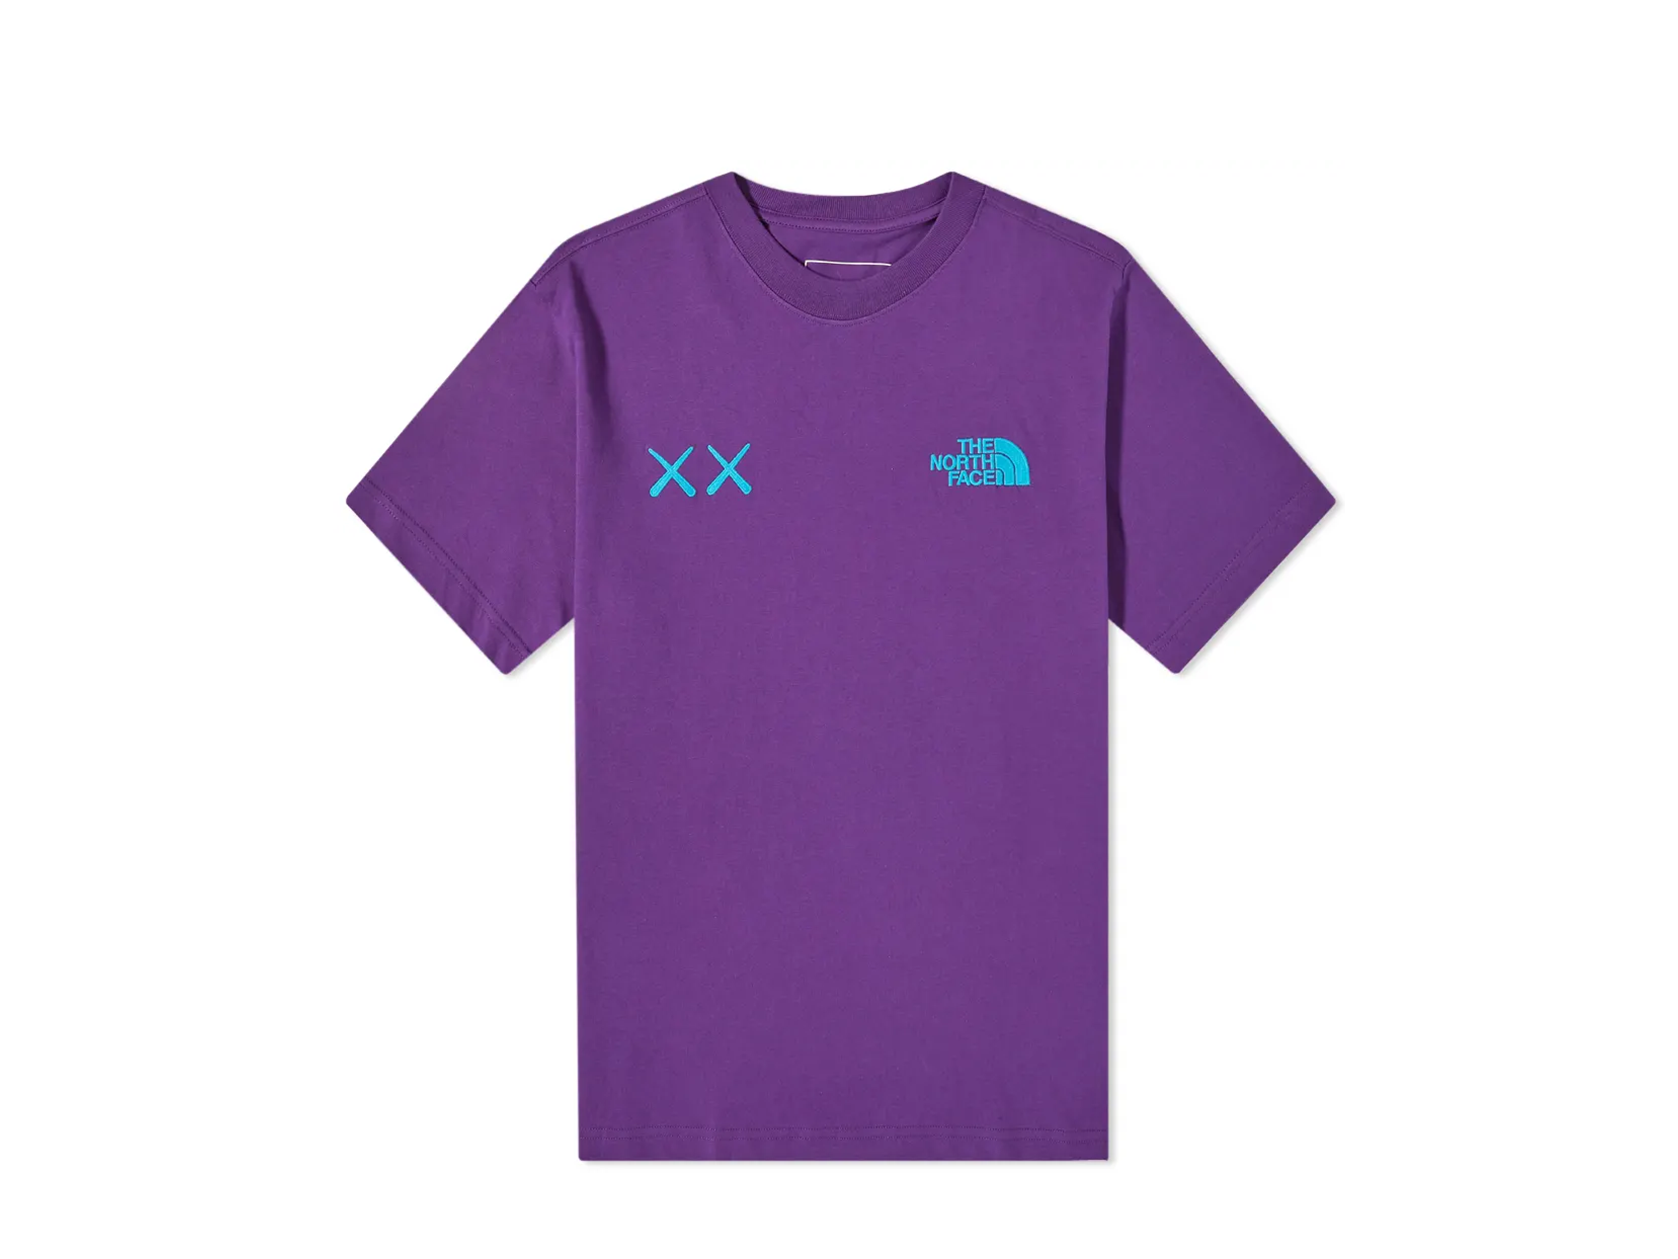 Double Boxed hoodie 99.99 KAWS x The North Face Gravity Purple Tee Double Boxed